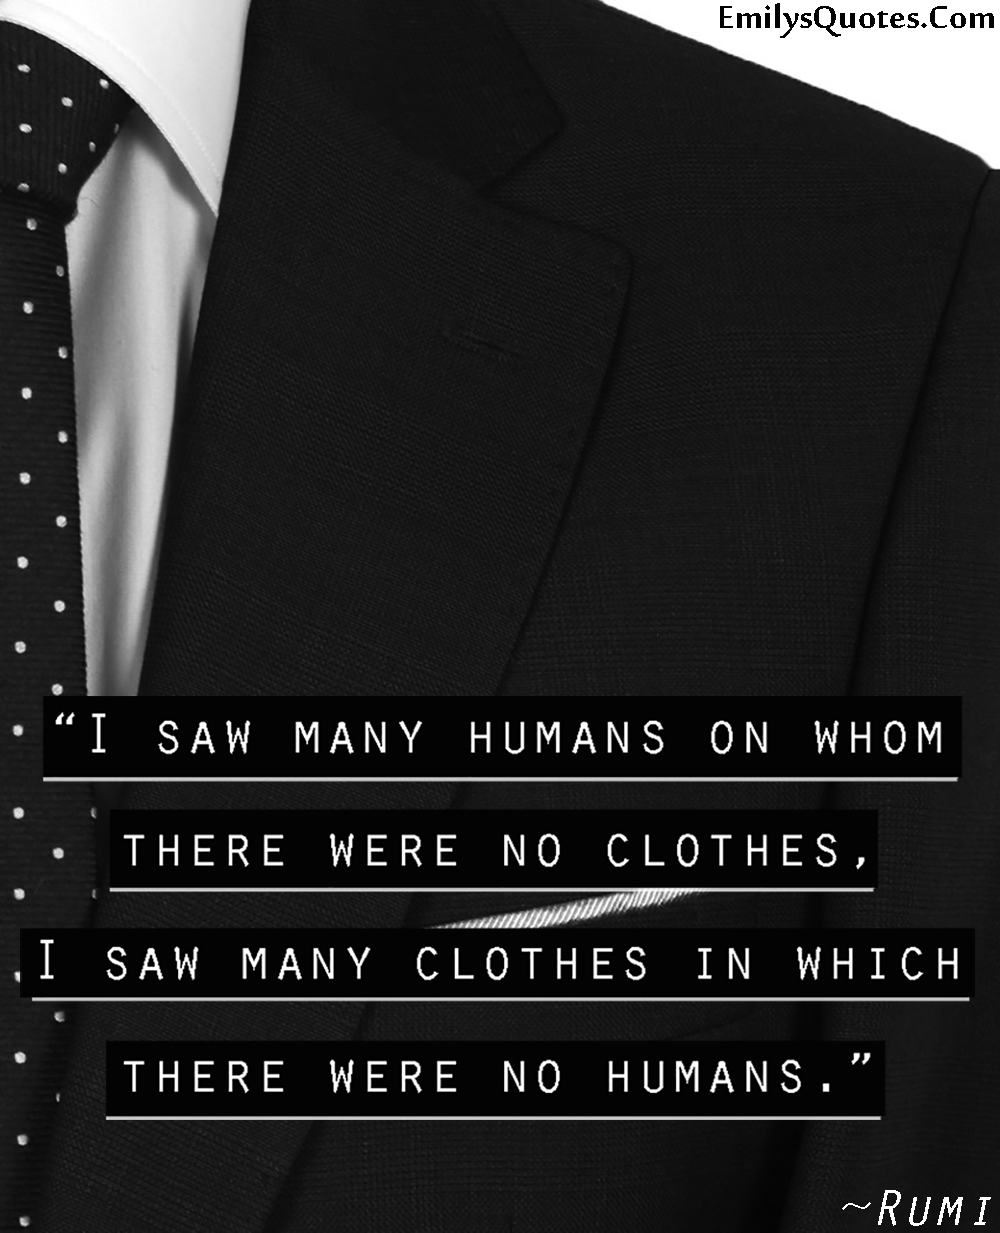 I saw many humans on whom there were no clothes, I saw many clothes in which there were no humans